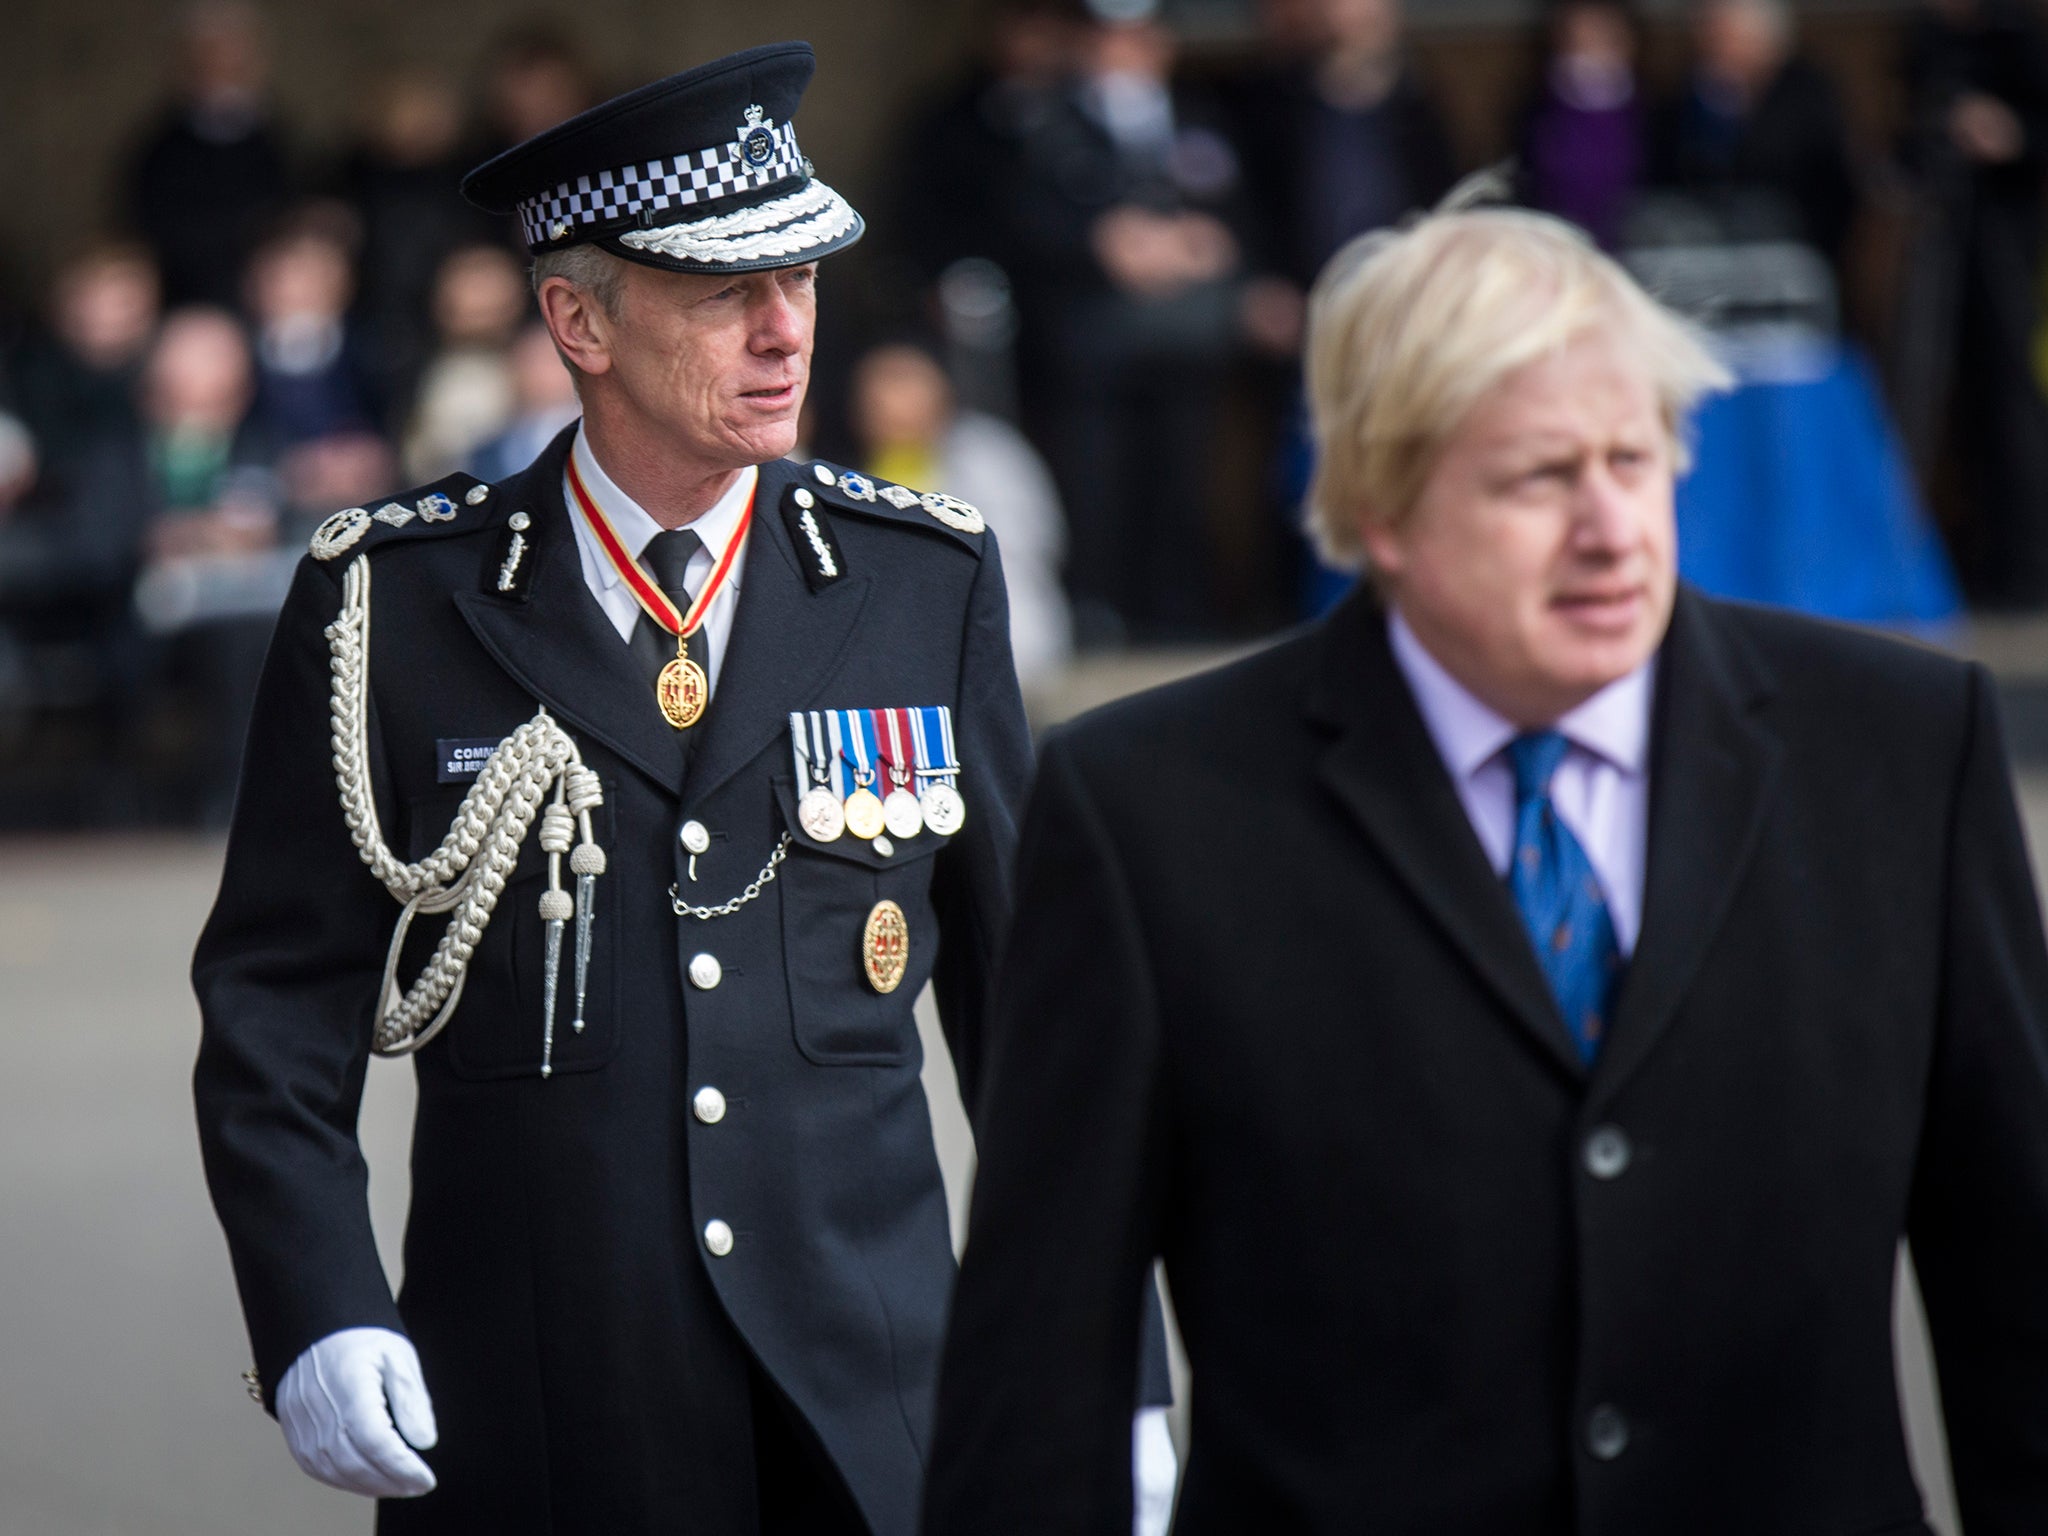 &#13;
Metropolitan Police Commissioner Sir Bernard Hogan-Howe, left, and Mayor of London Boris Johnson attend the 'Passing Out Parade' for new recruits to the Metropolitan Police Service at Hendon Training Centre in March this year (Getty)&#13;